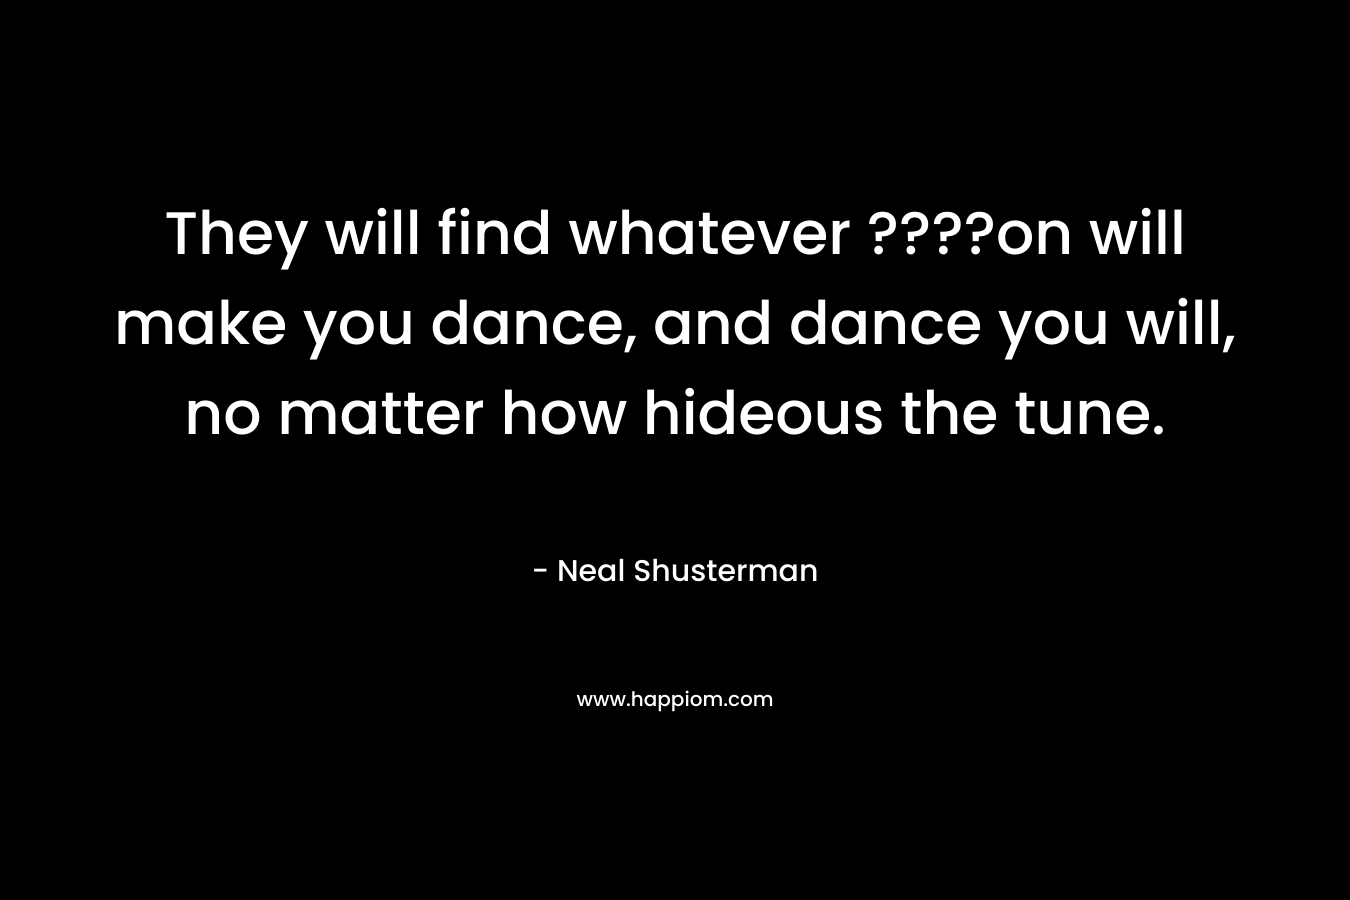 They will find whatever ????on will make you dance, and dance you will, no matter how hideous the tune.